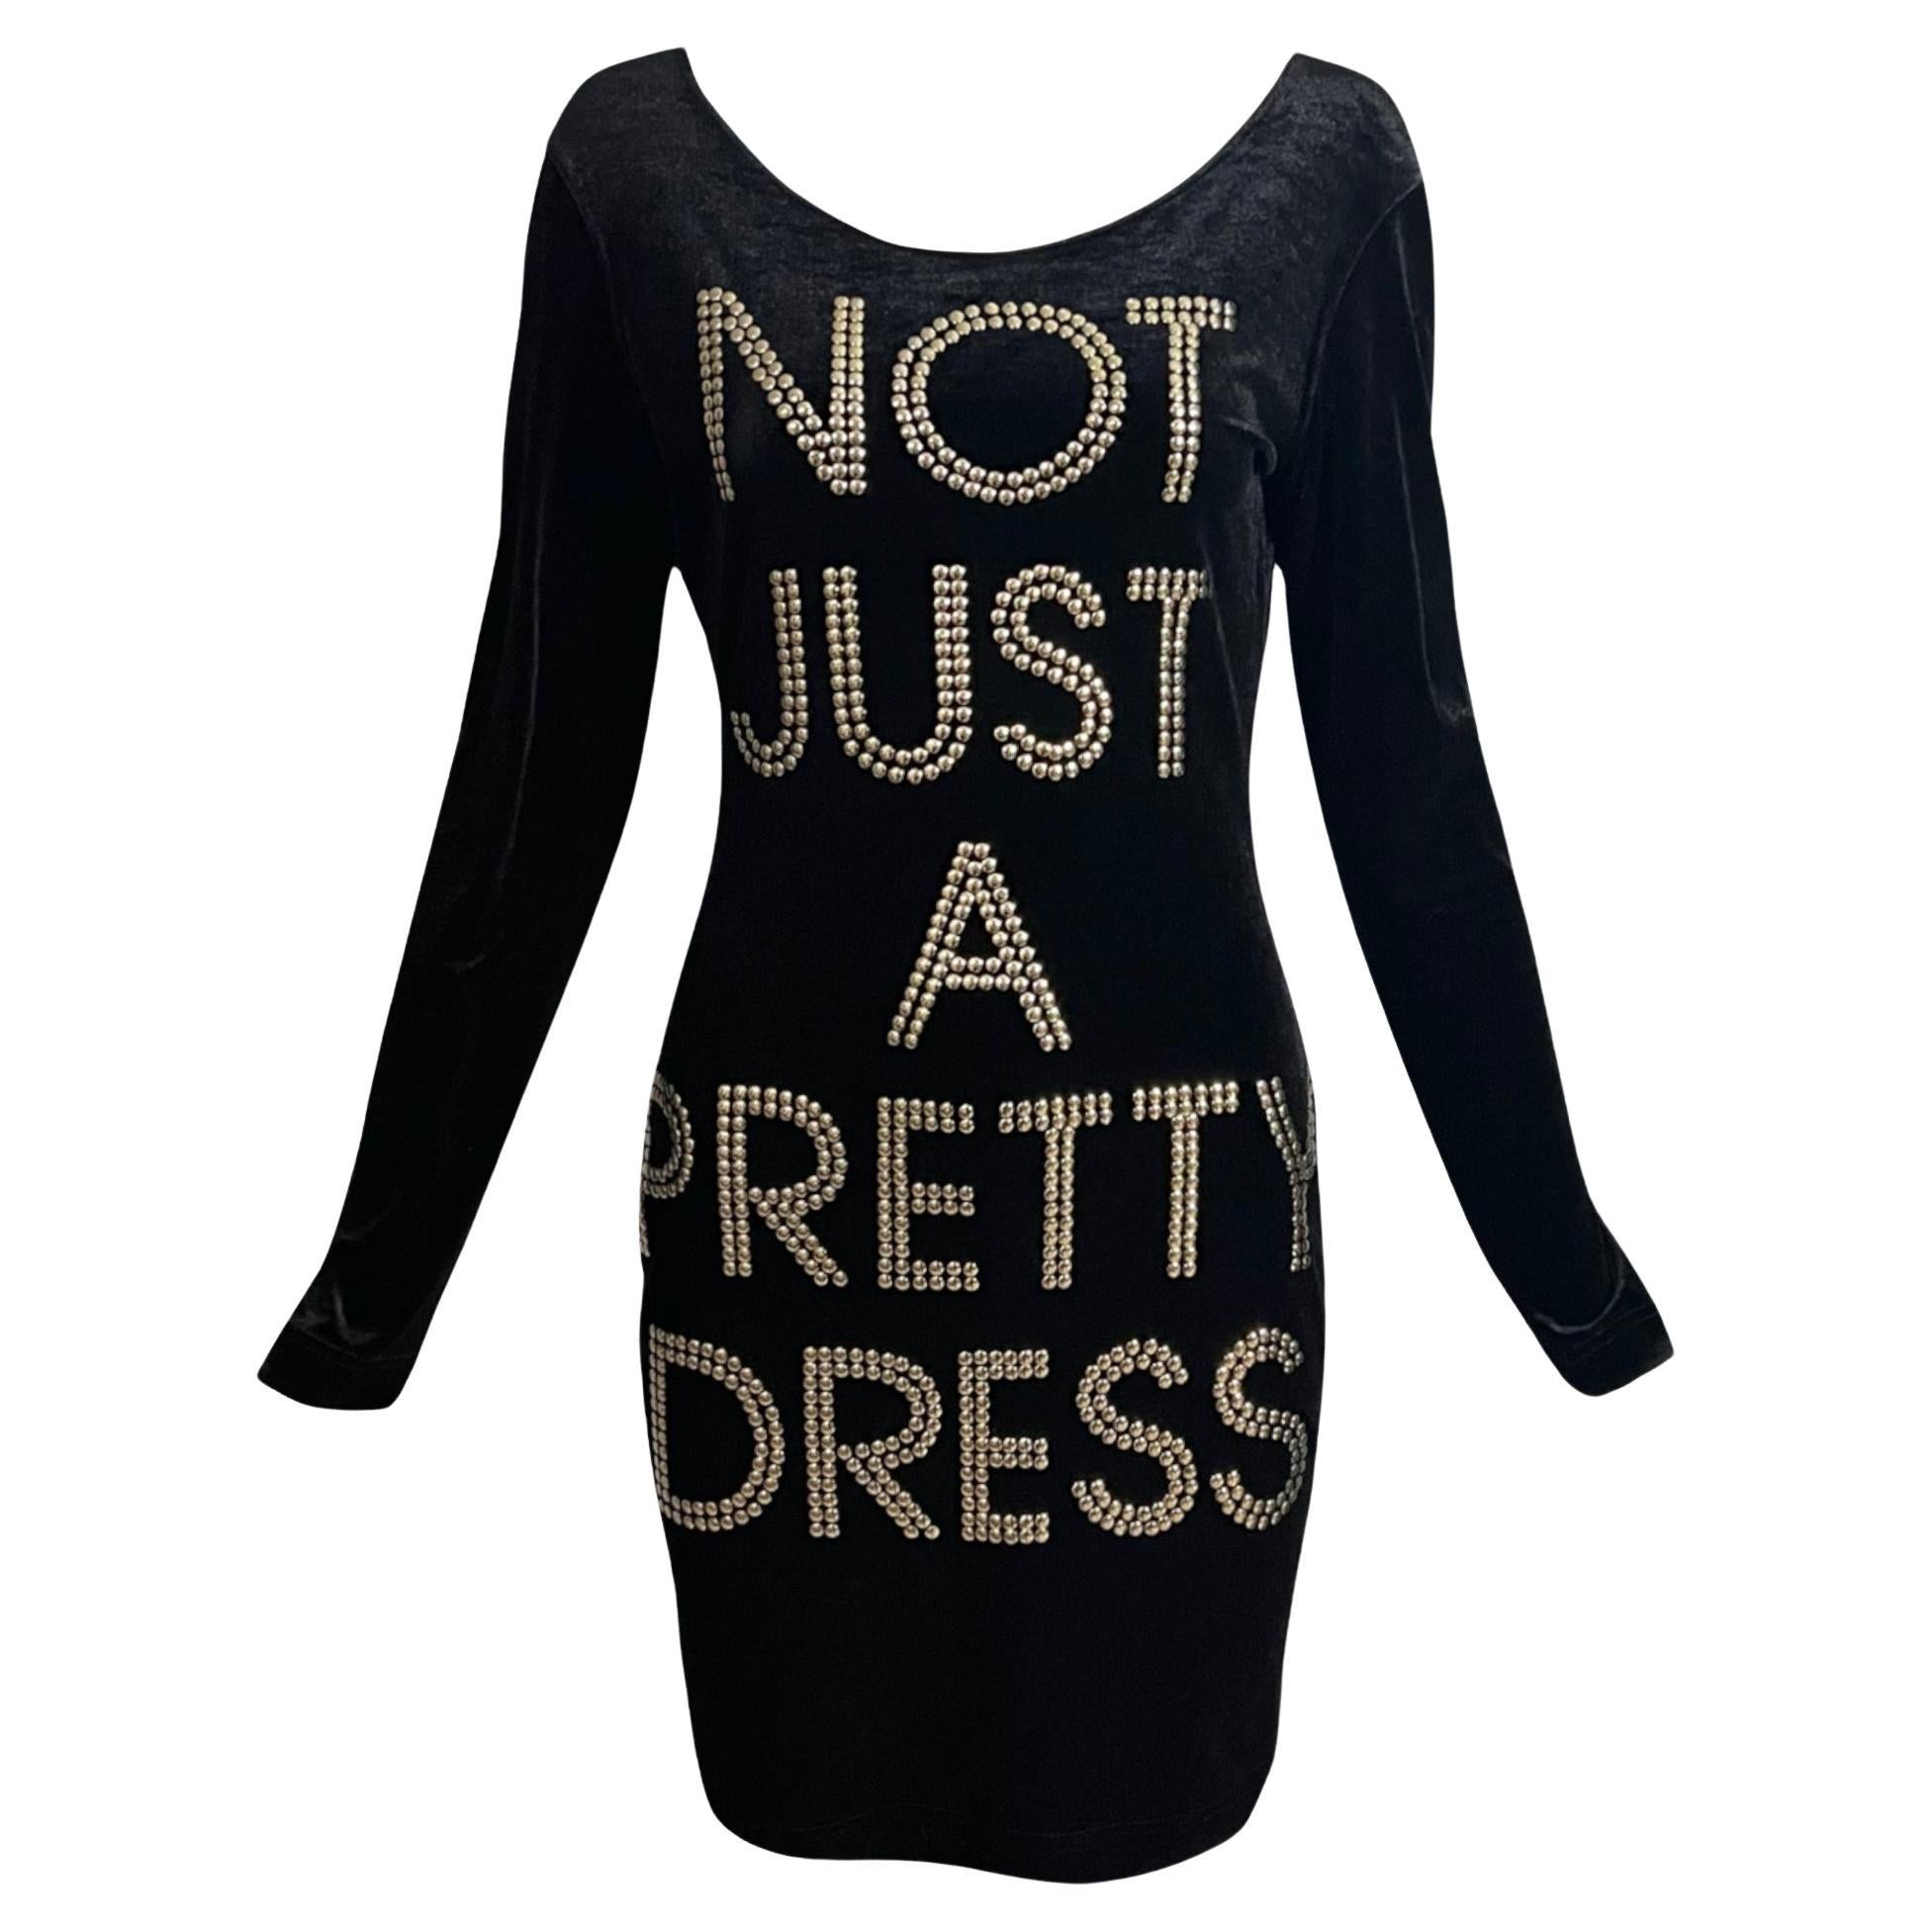 1990's Moschino Cheap & Chic "Not Just A Pretty Dress" Velvet Studded Dress For Sale